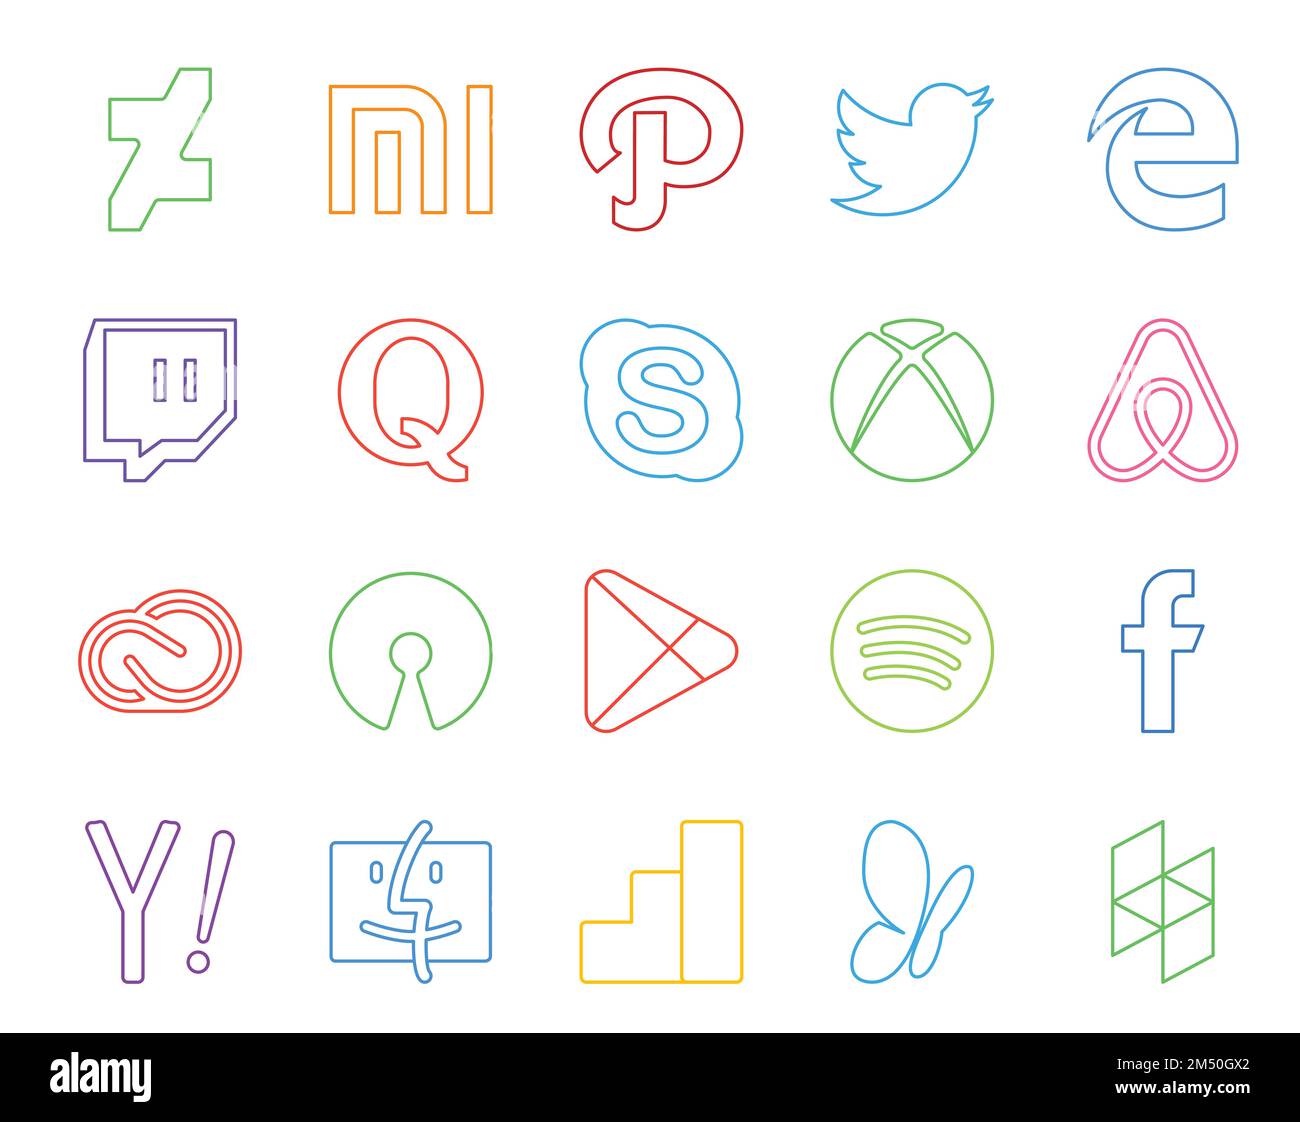 20 Social Media Icon Pack Including google play. adobe. question. cc. air bnb Stock Vector